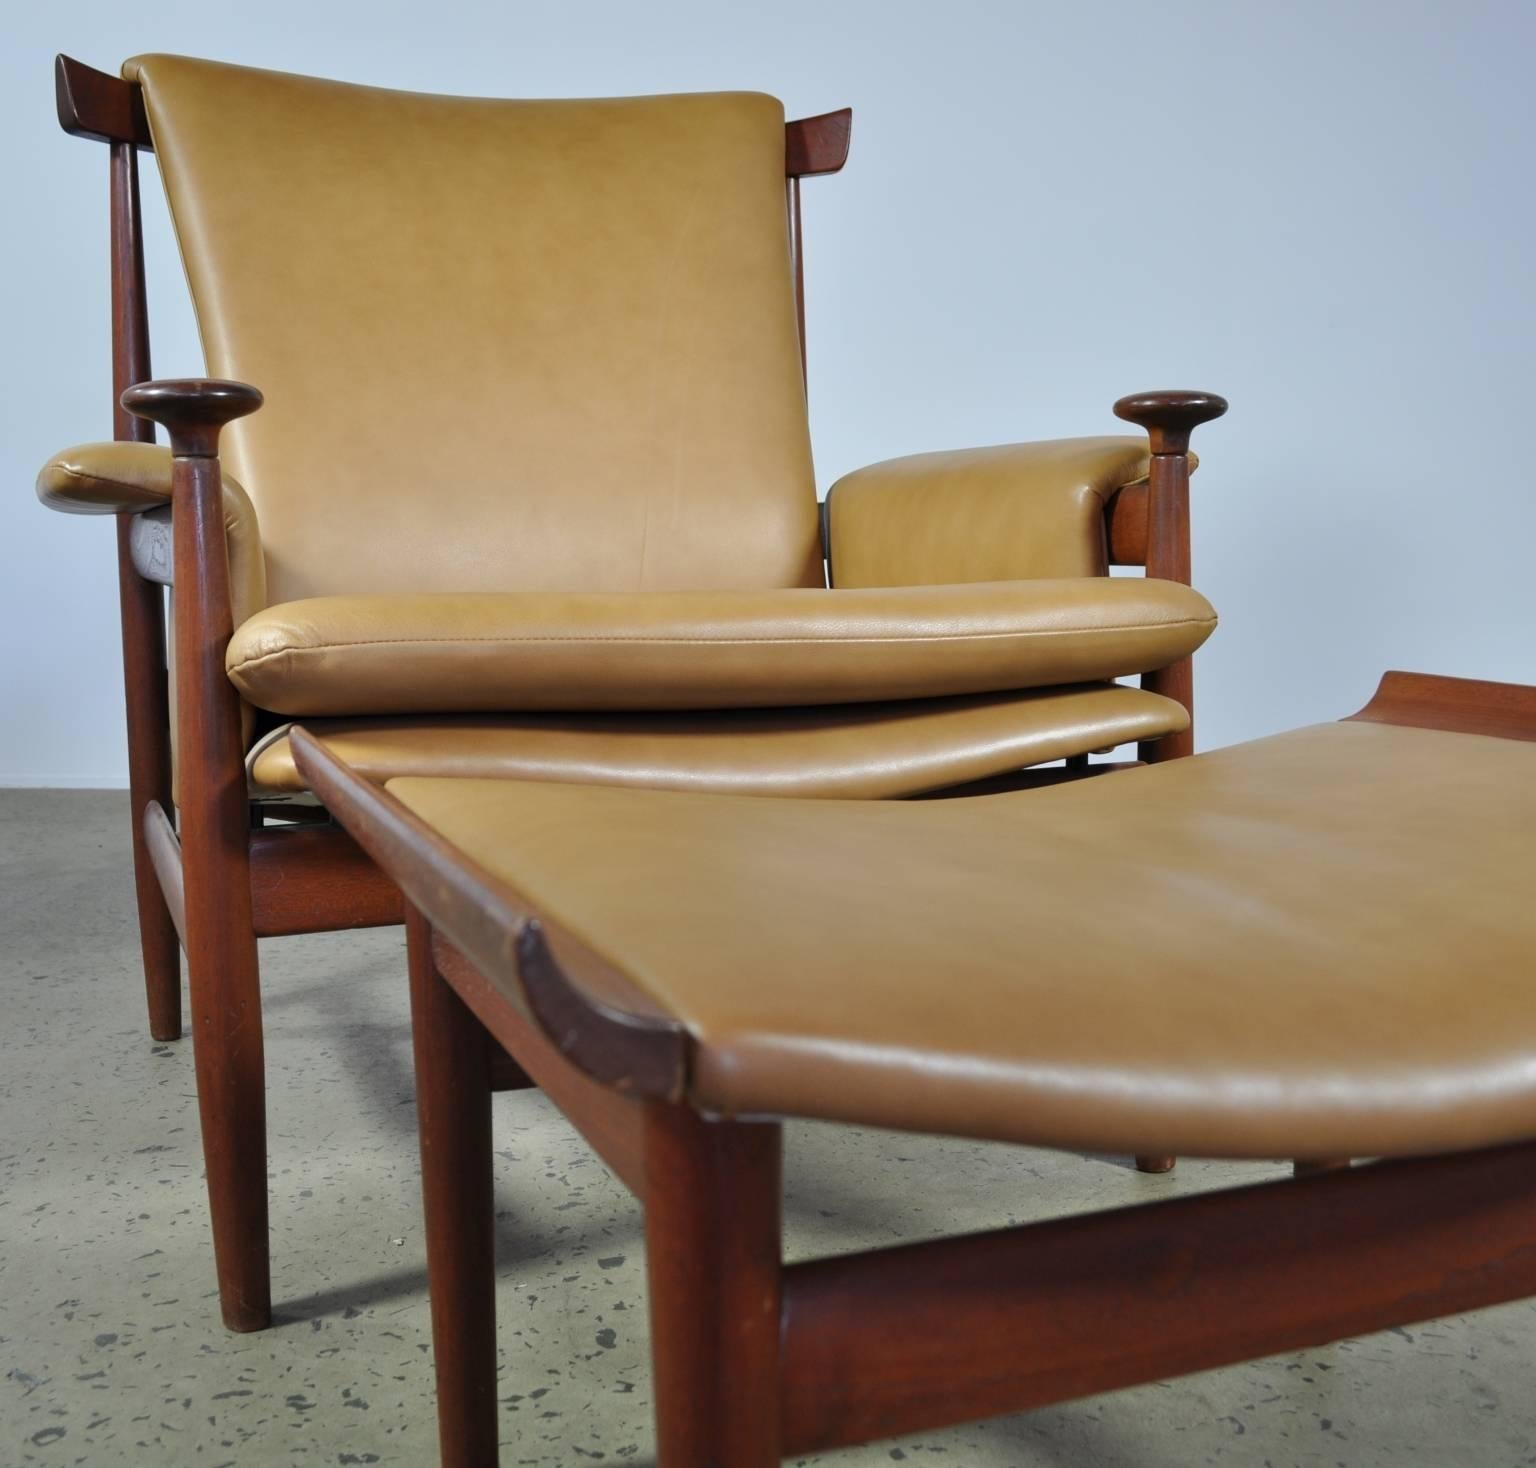 Mid-20th Century Finn Juhl Bwana Chair with Ottoman for France and Sons in Teak and Leather